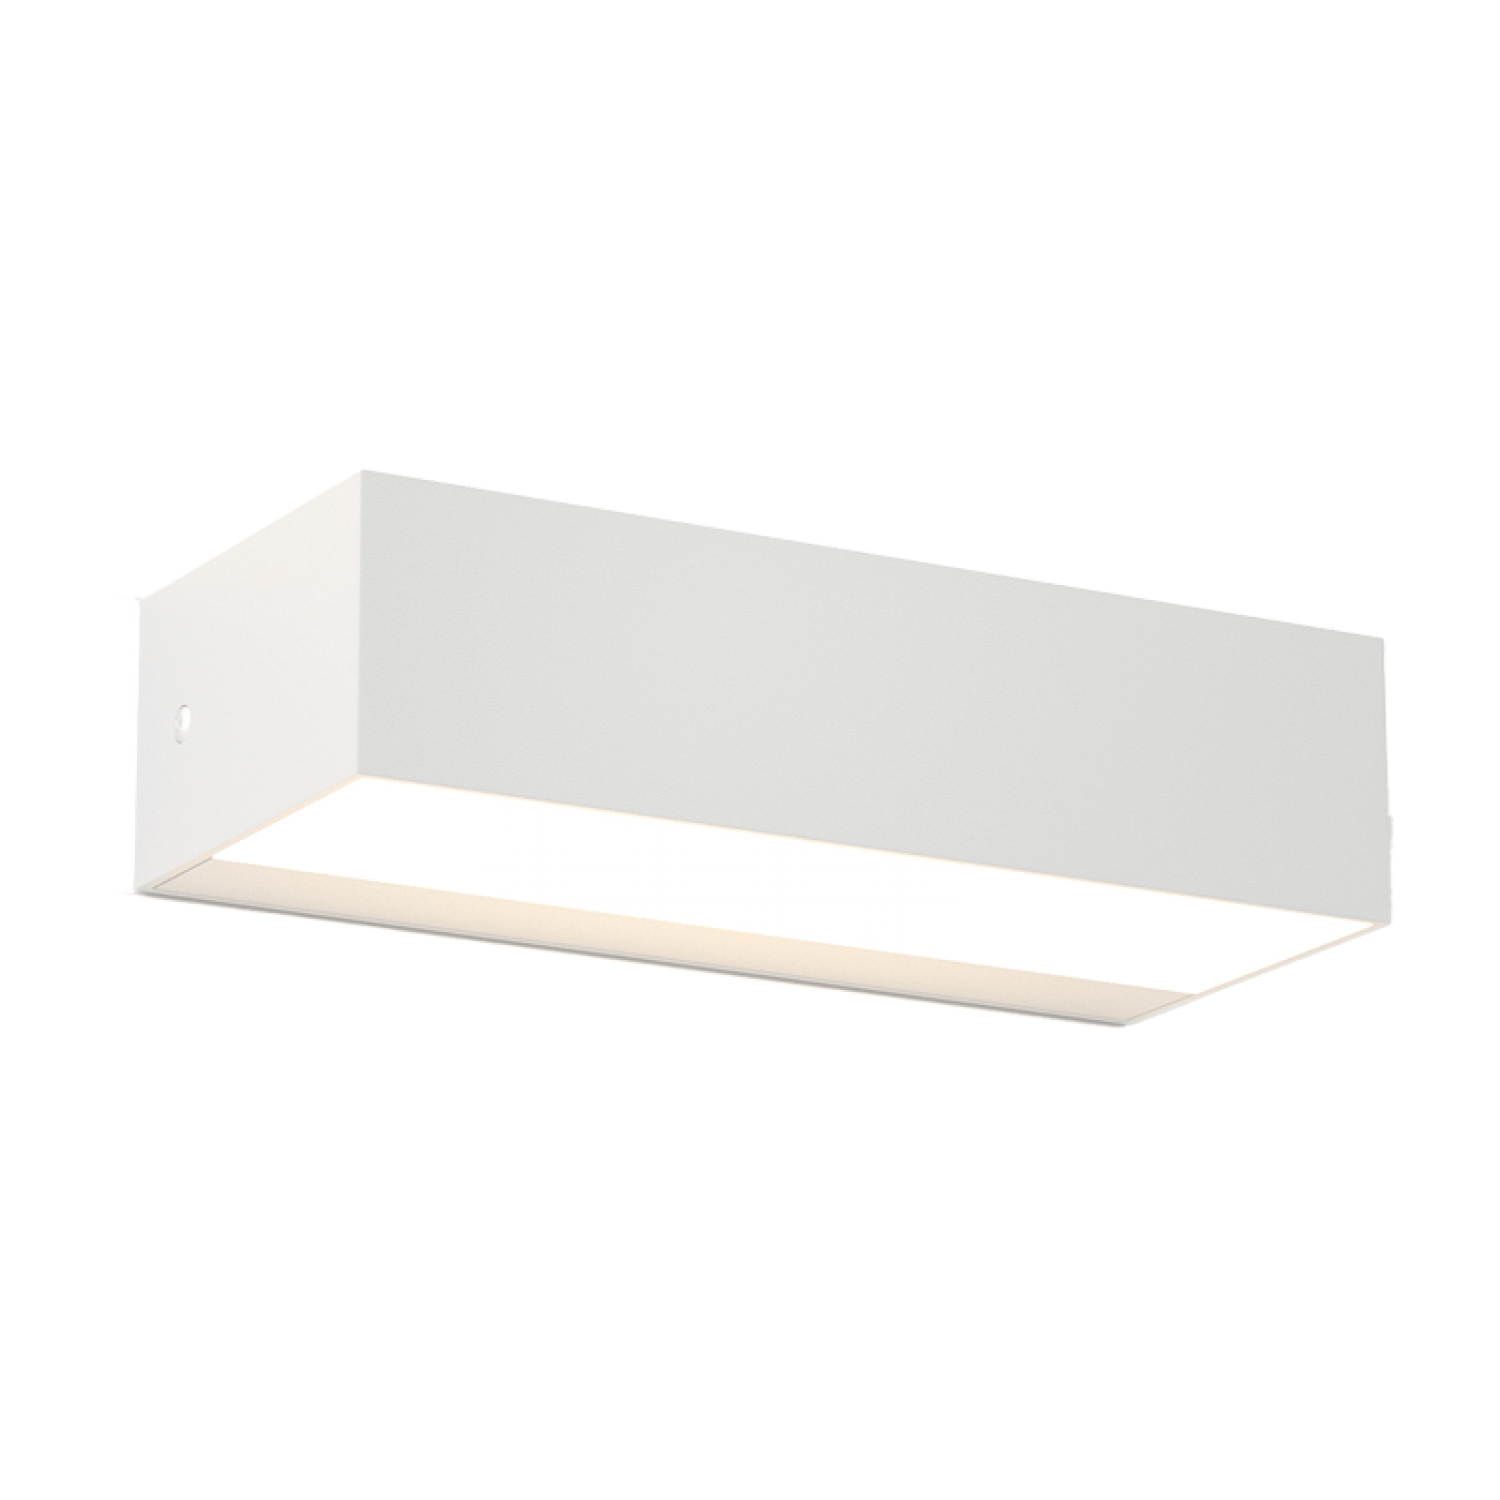 Martin LED 9W 3CCT Outdoor Up-Down Wall Lamp White D:17cmx4.6cm (80200820)